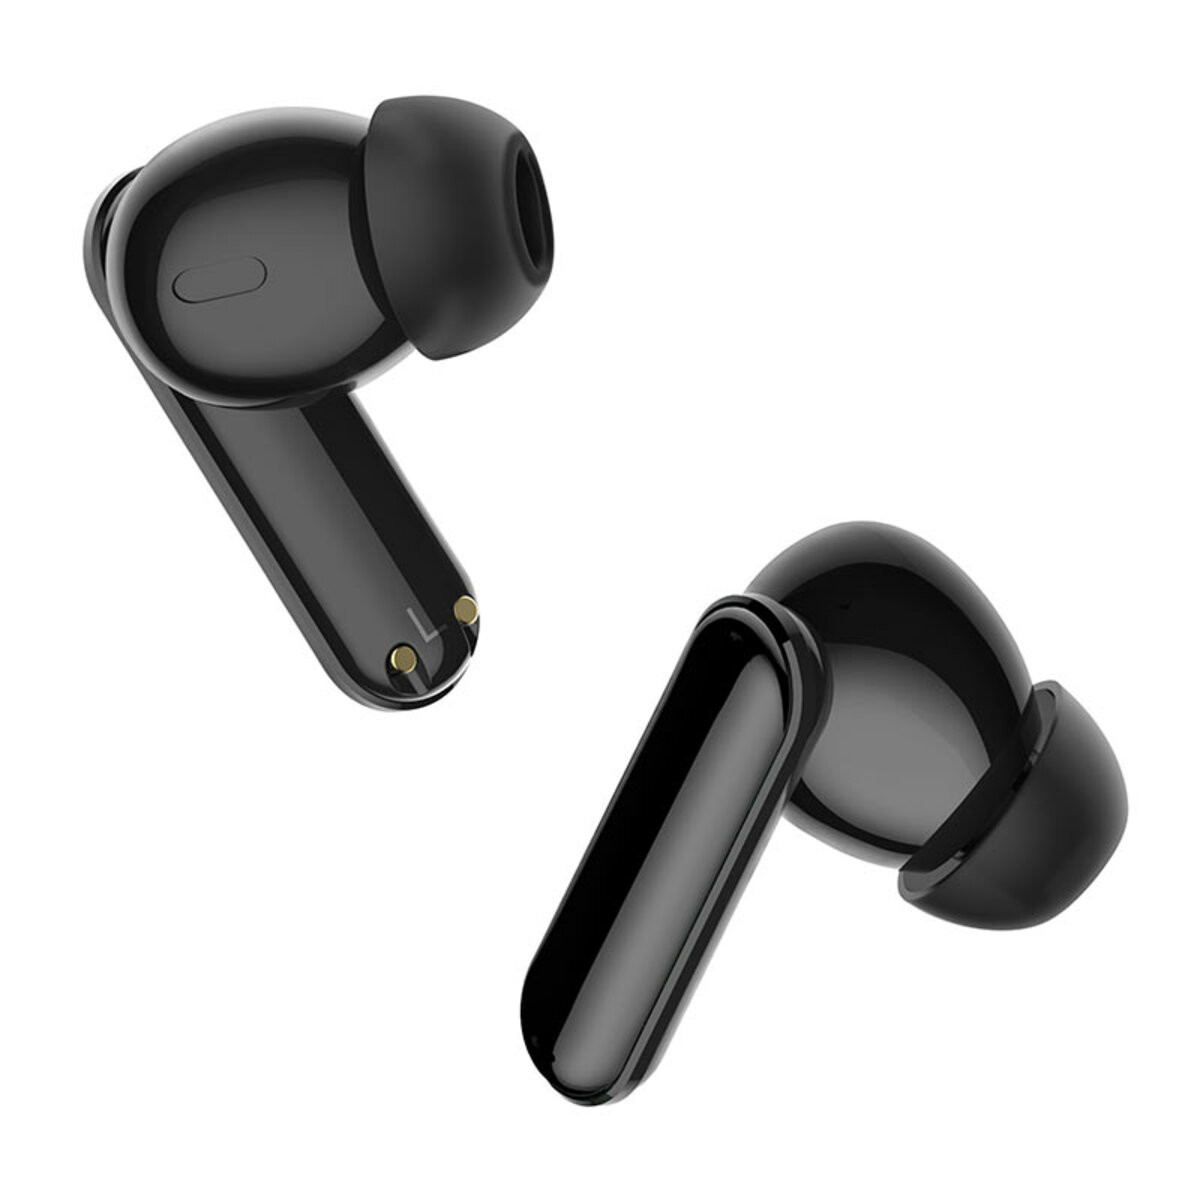 Навушники  ACEFAST T3 True wireless stereo earbuds - 3